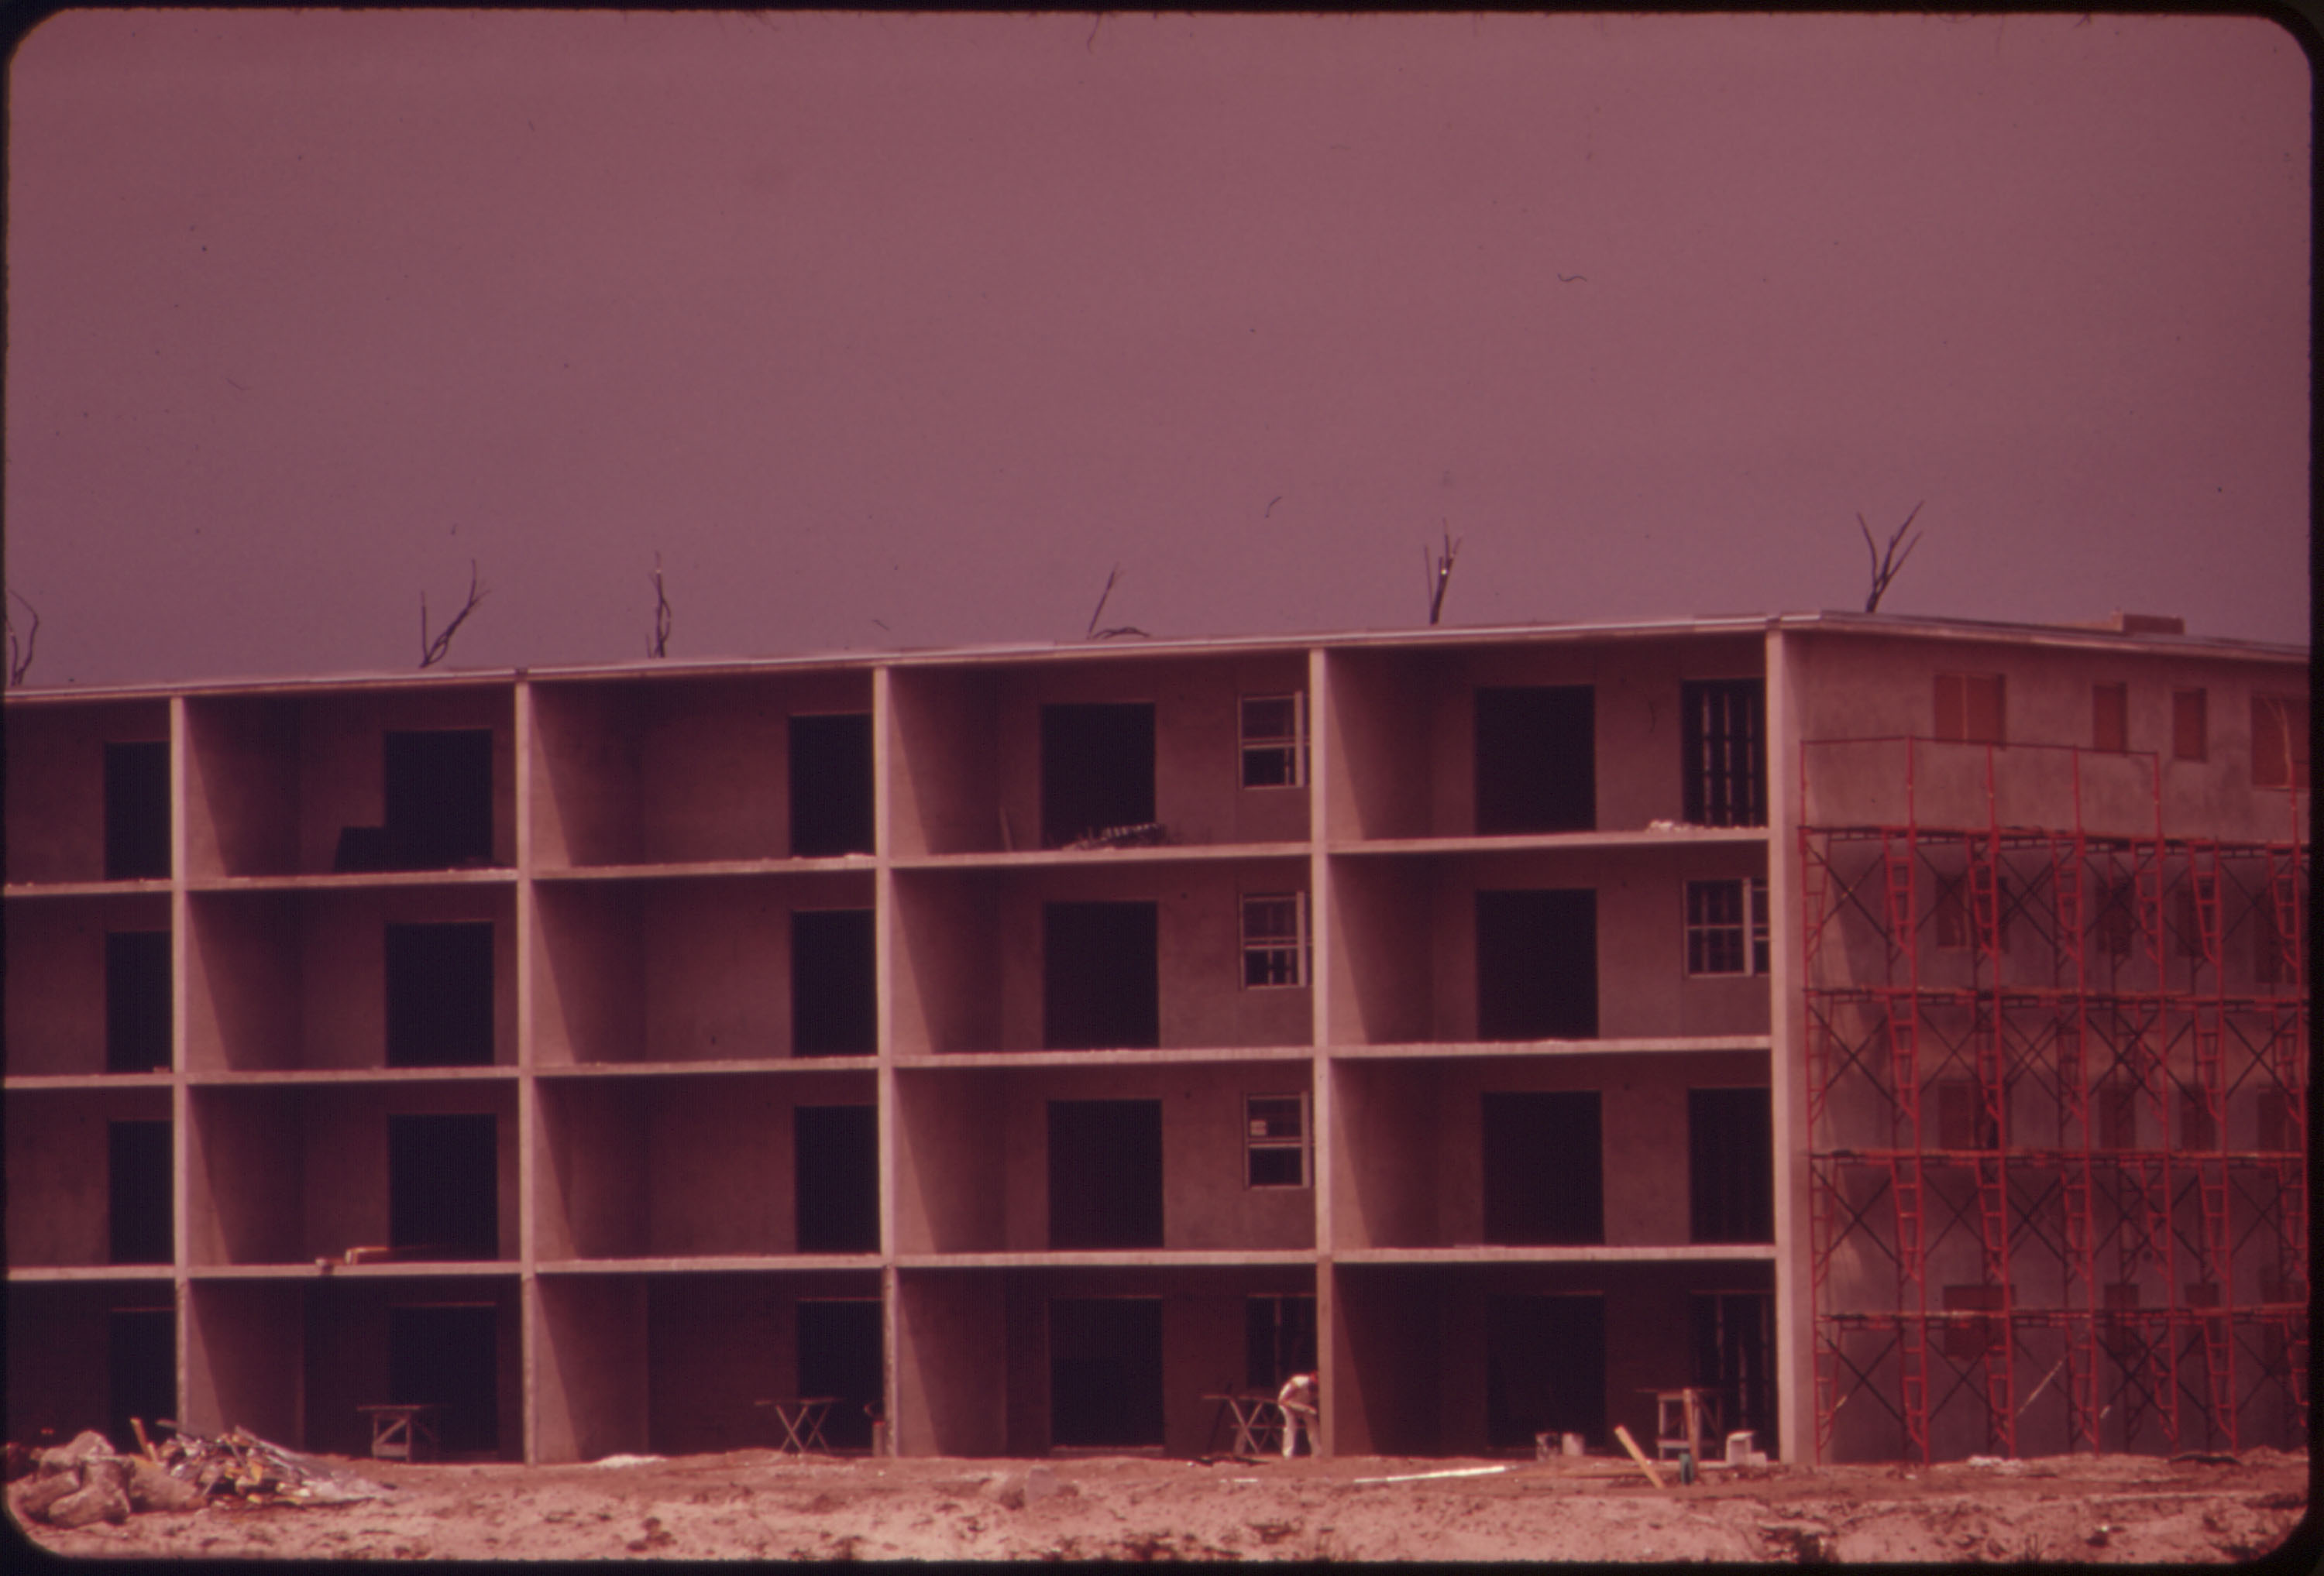 Apartment Under Construction at Century Village Retirement Community. The Entire Complex of 7,838 Units (Individually-Owned Condominiums) Is Due to Be Completed in the Spring of 1974.